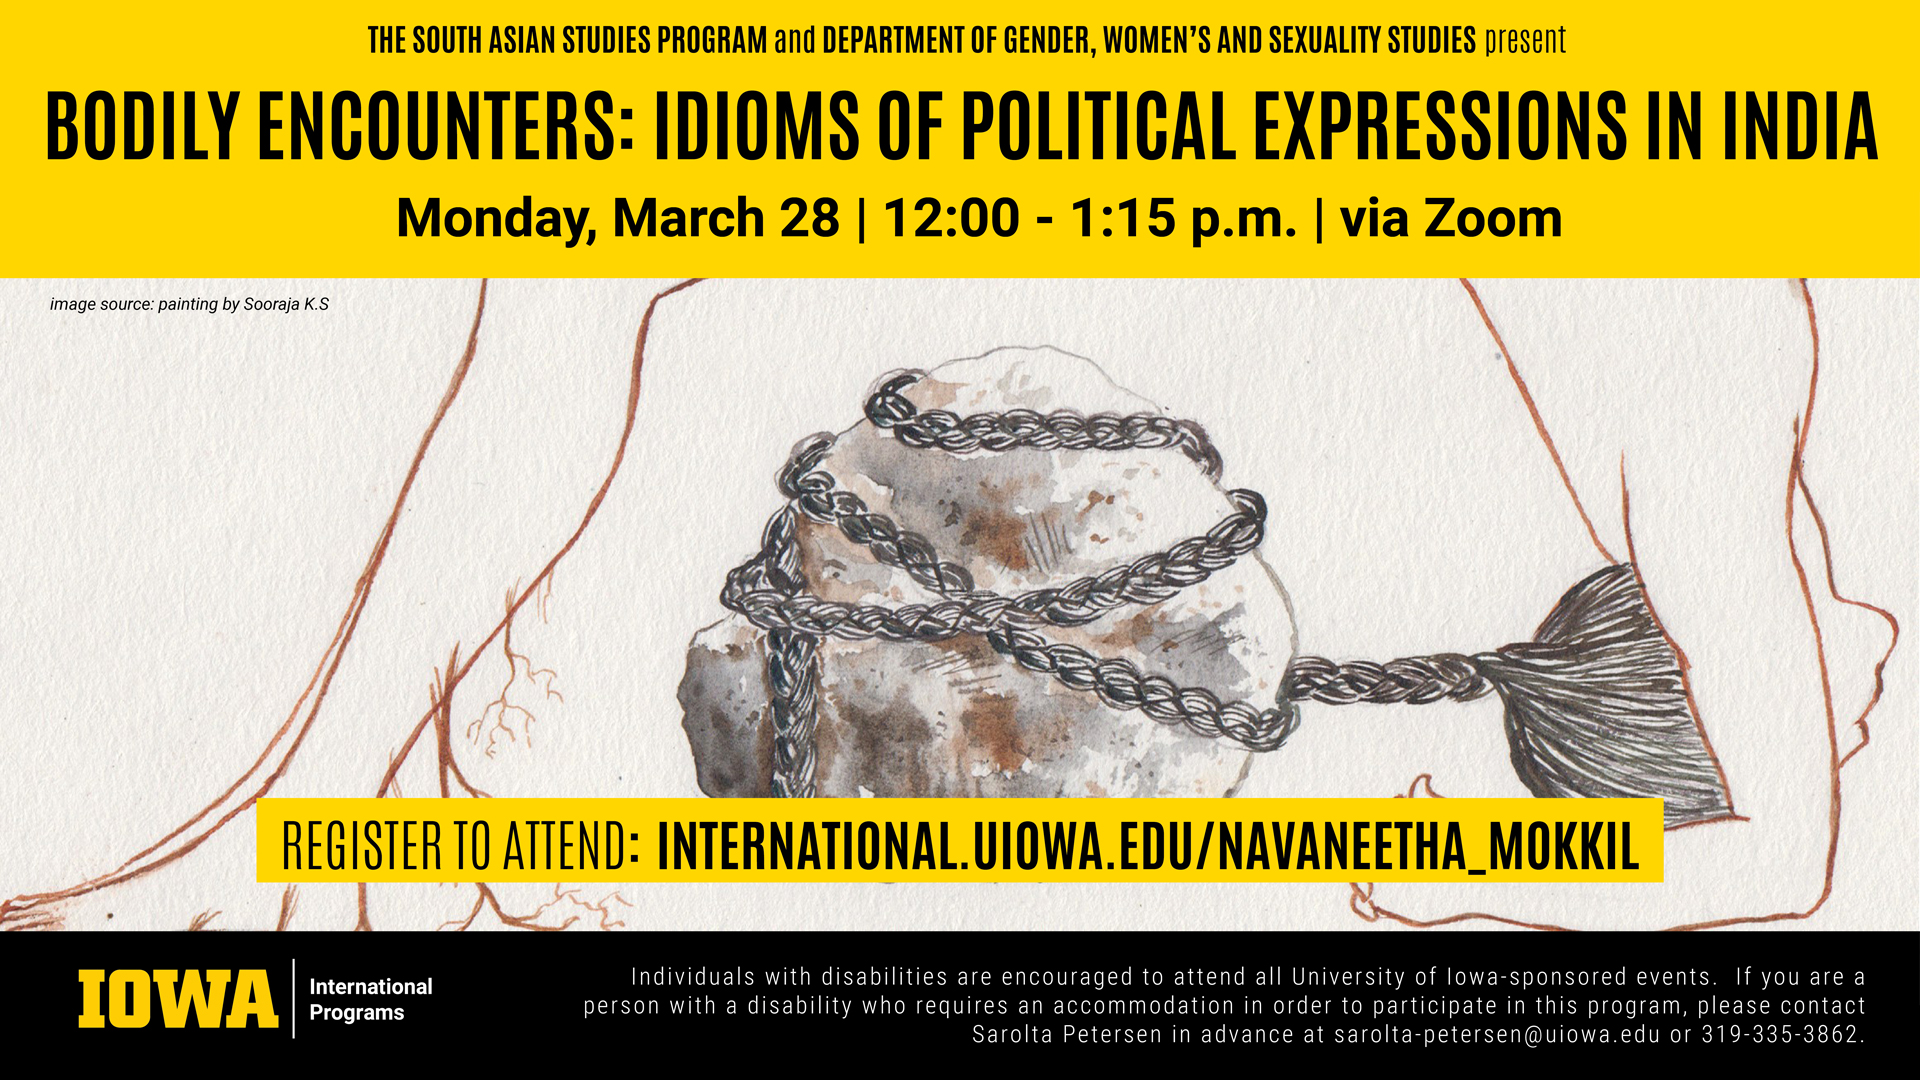 The south Asian studies program and department of gender, women's, and sexuality studies presents bodily encounters idioms of political expressions in India on Monday, March 28 from 12 noon to 1:15 PM via Zoom register to attend at international.uiowa.edu/navaneetha_mokkil